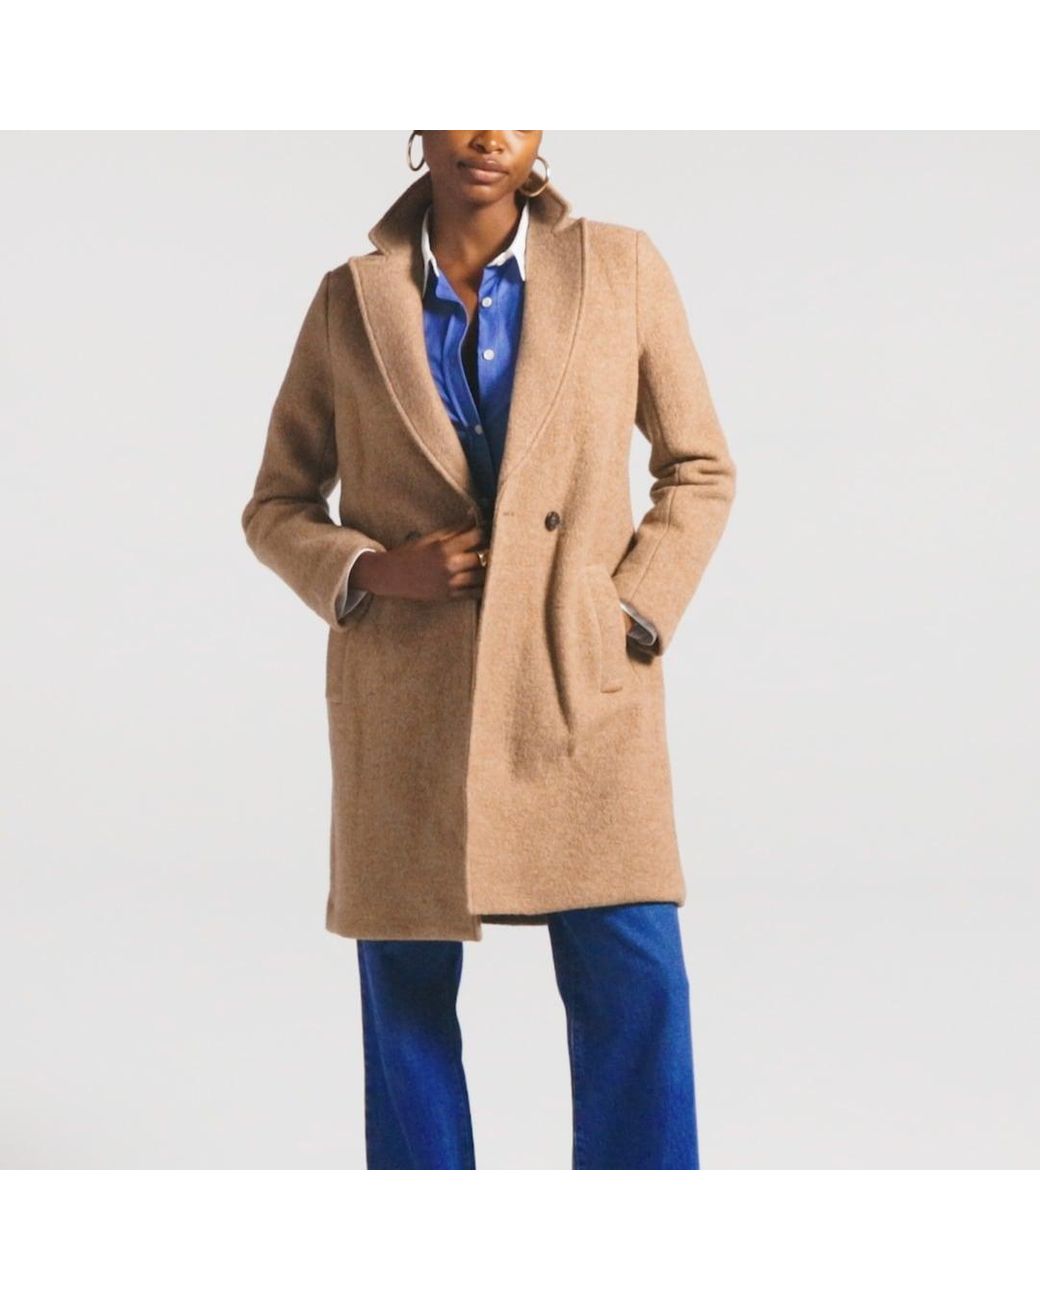 J.Crew New Daphne Topcoat In Italian Boiled Wool in Natural | Lyst